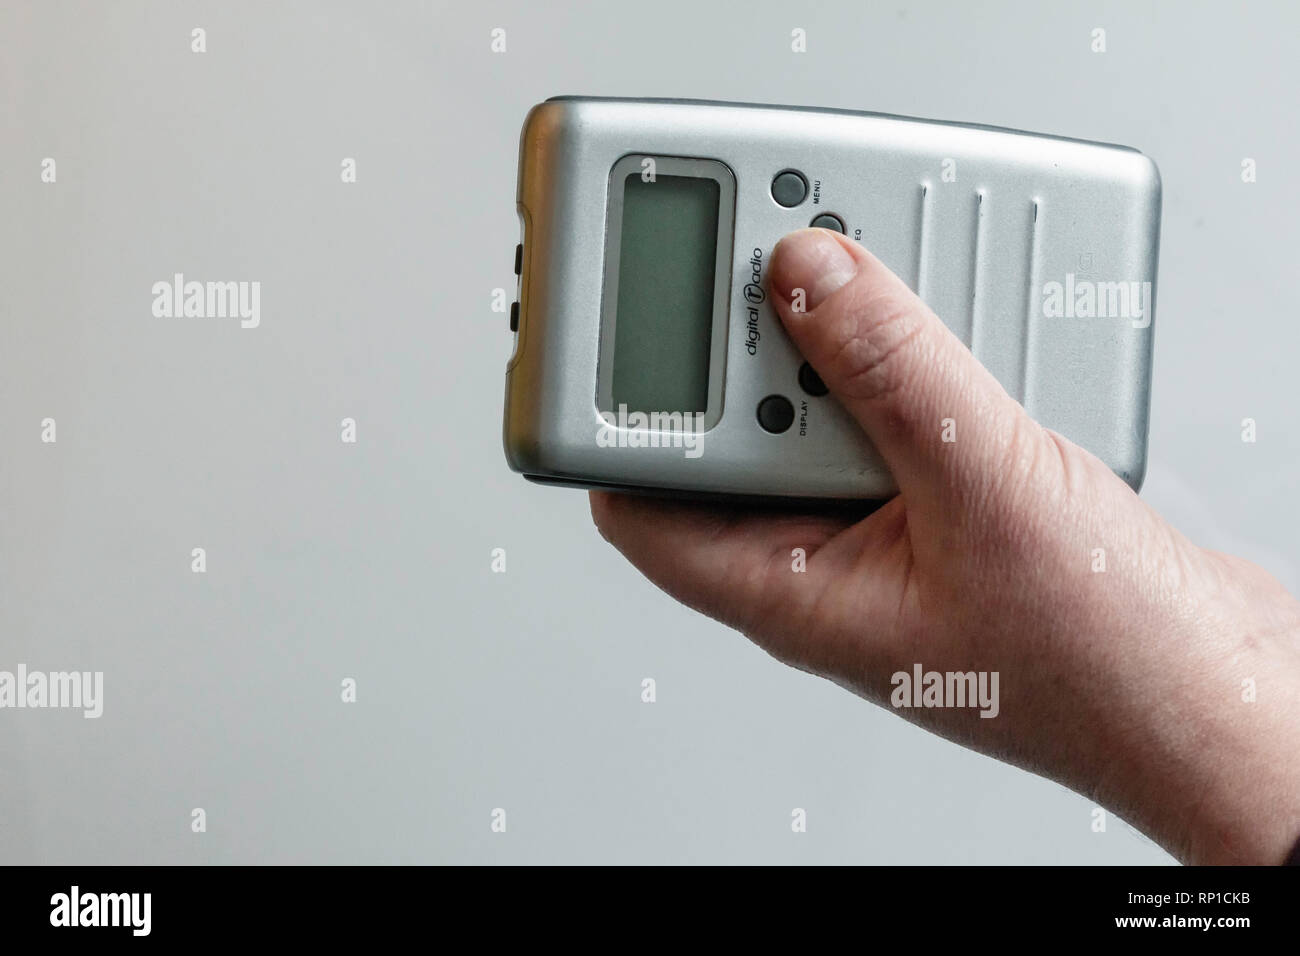 Portable Digital Radio player from the early 2000s Stock Photo - Alamy